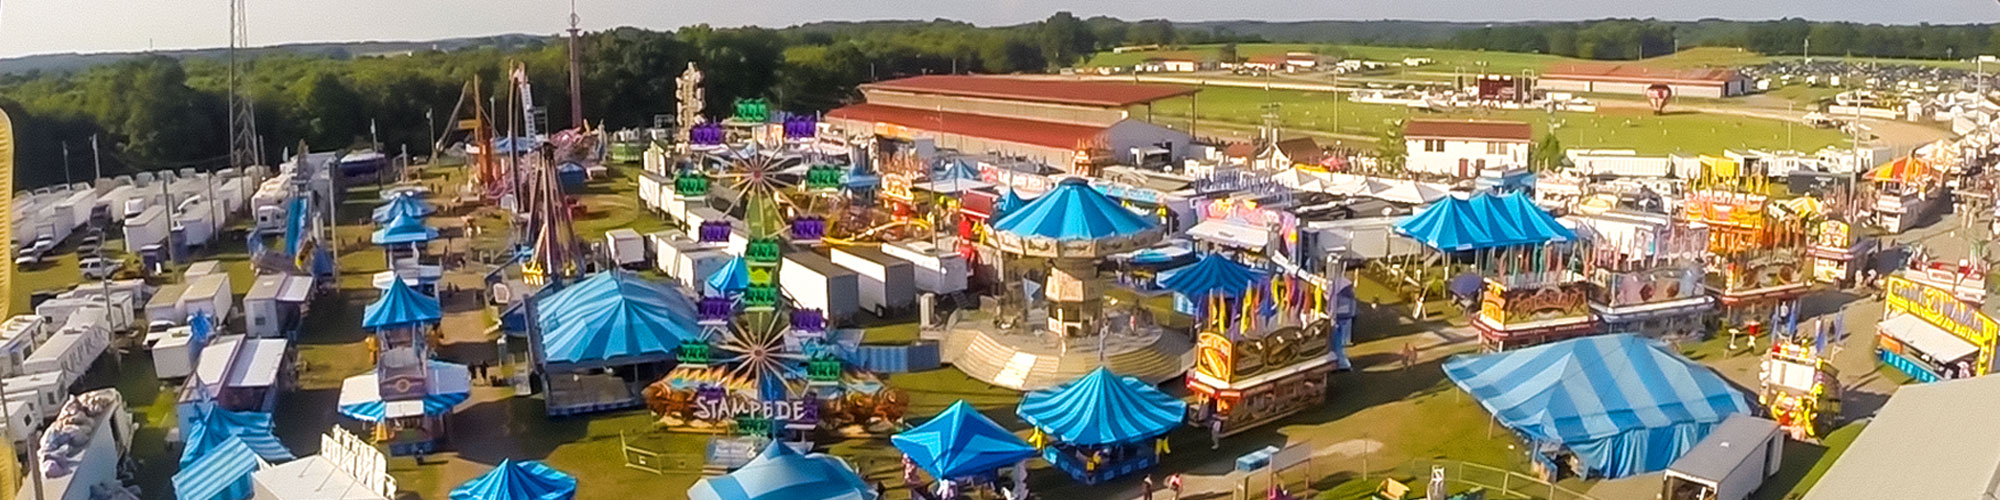 Daily Attractions The Big Butler Fair